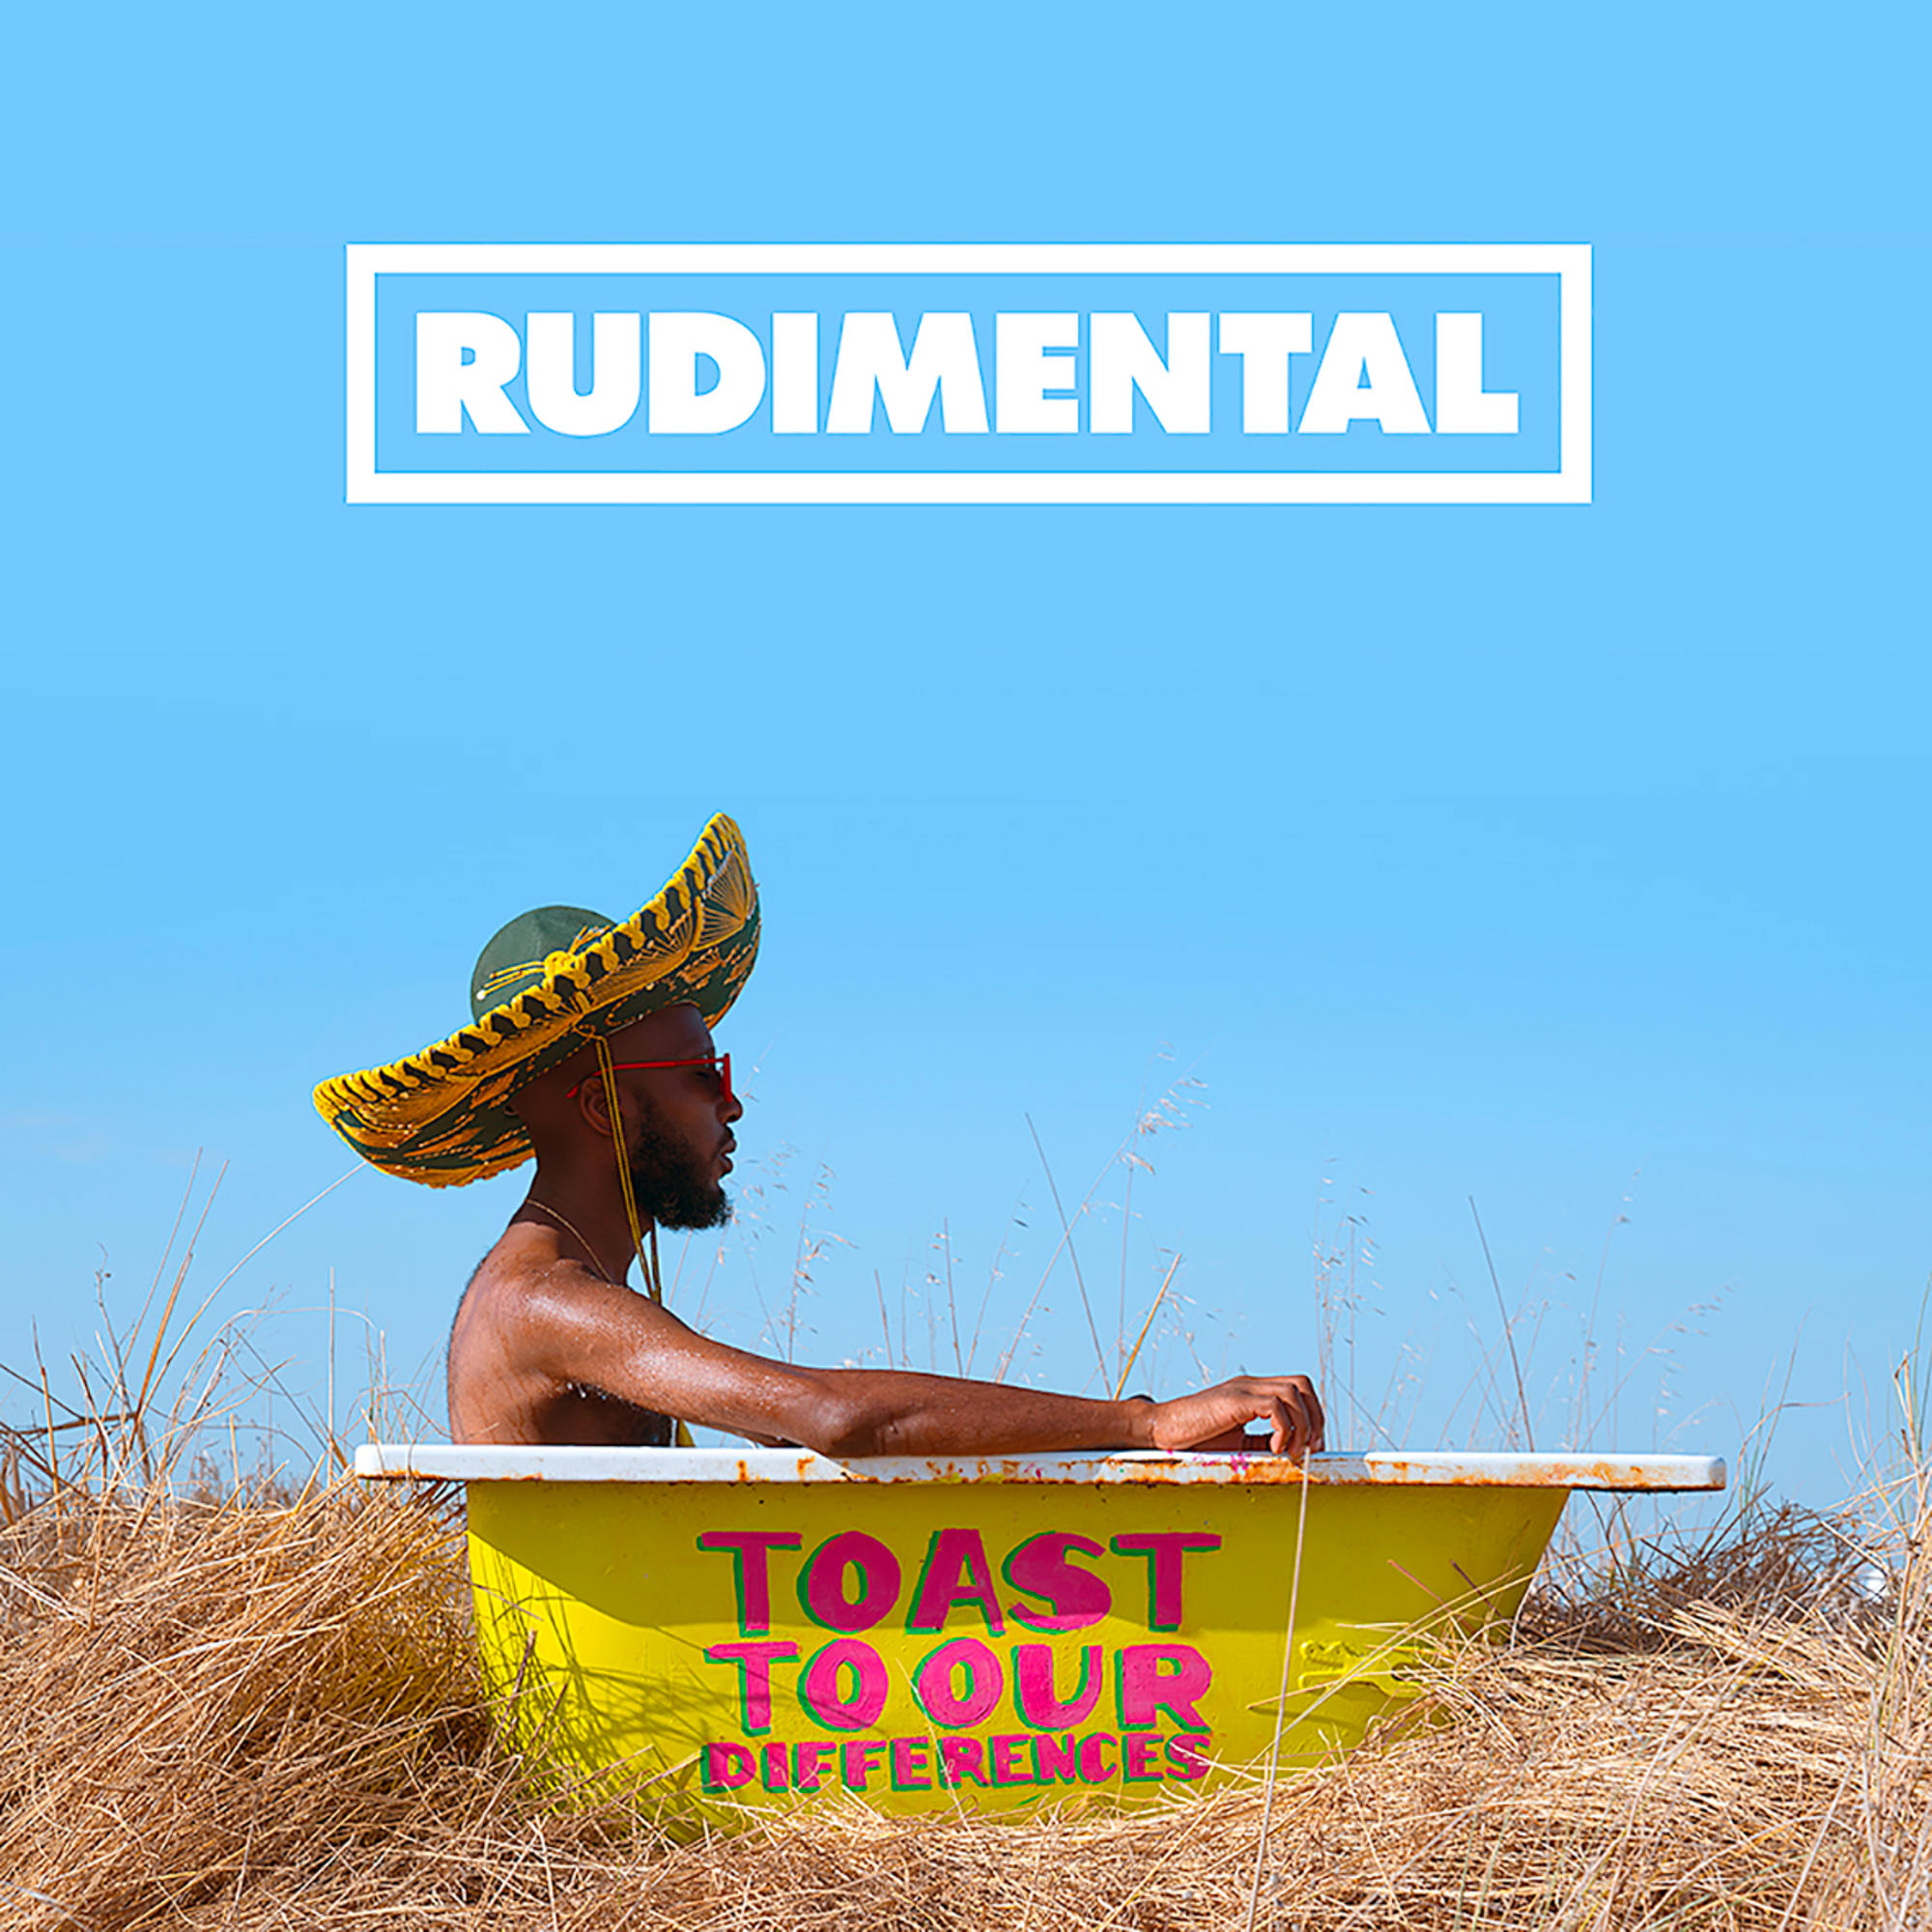 Our (CD) Toast Rudimental - Differences - to